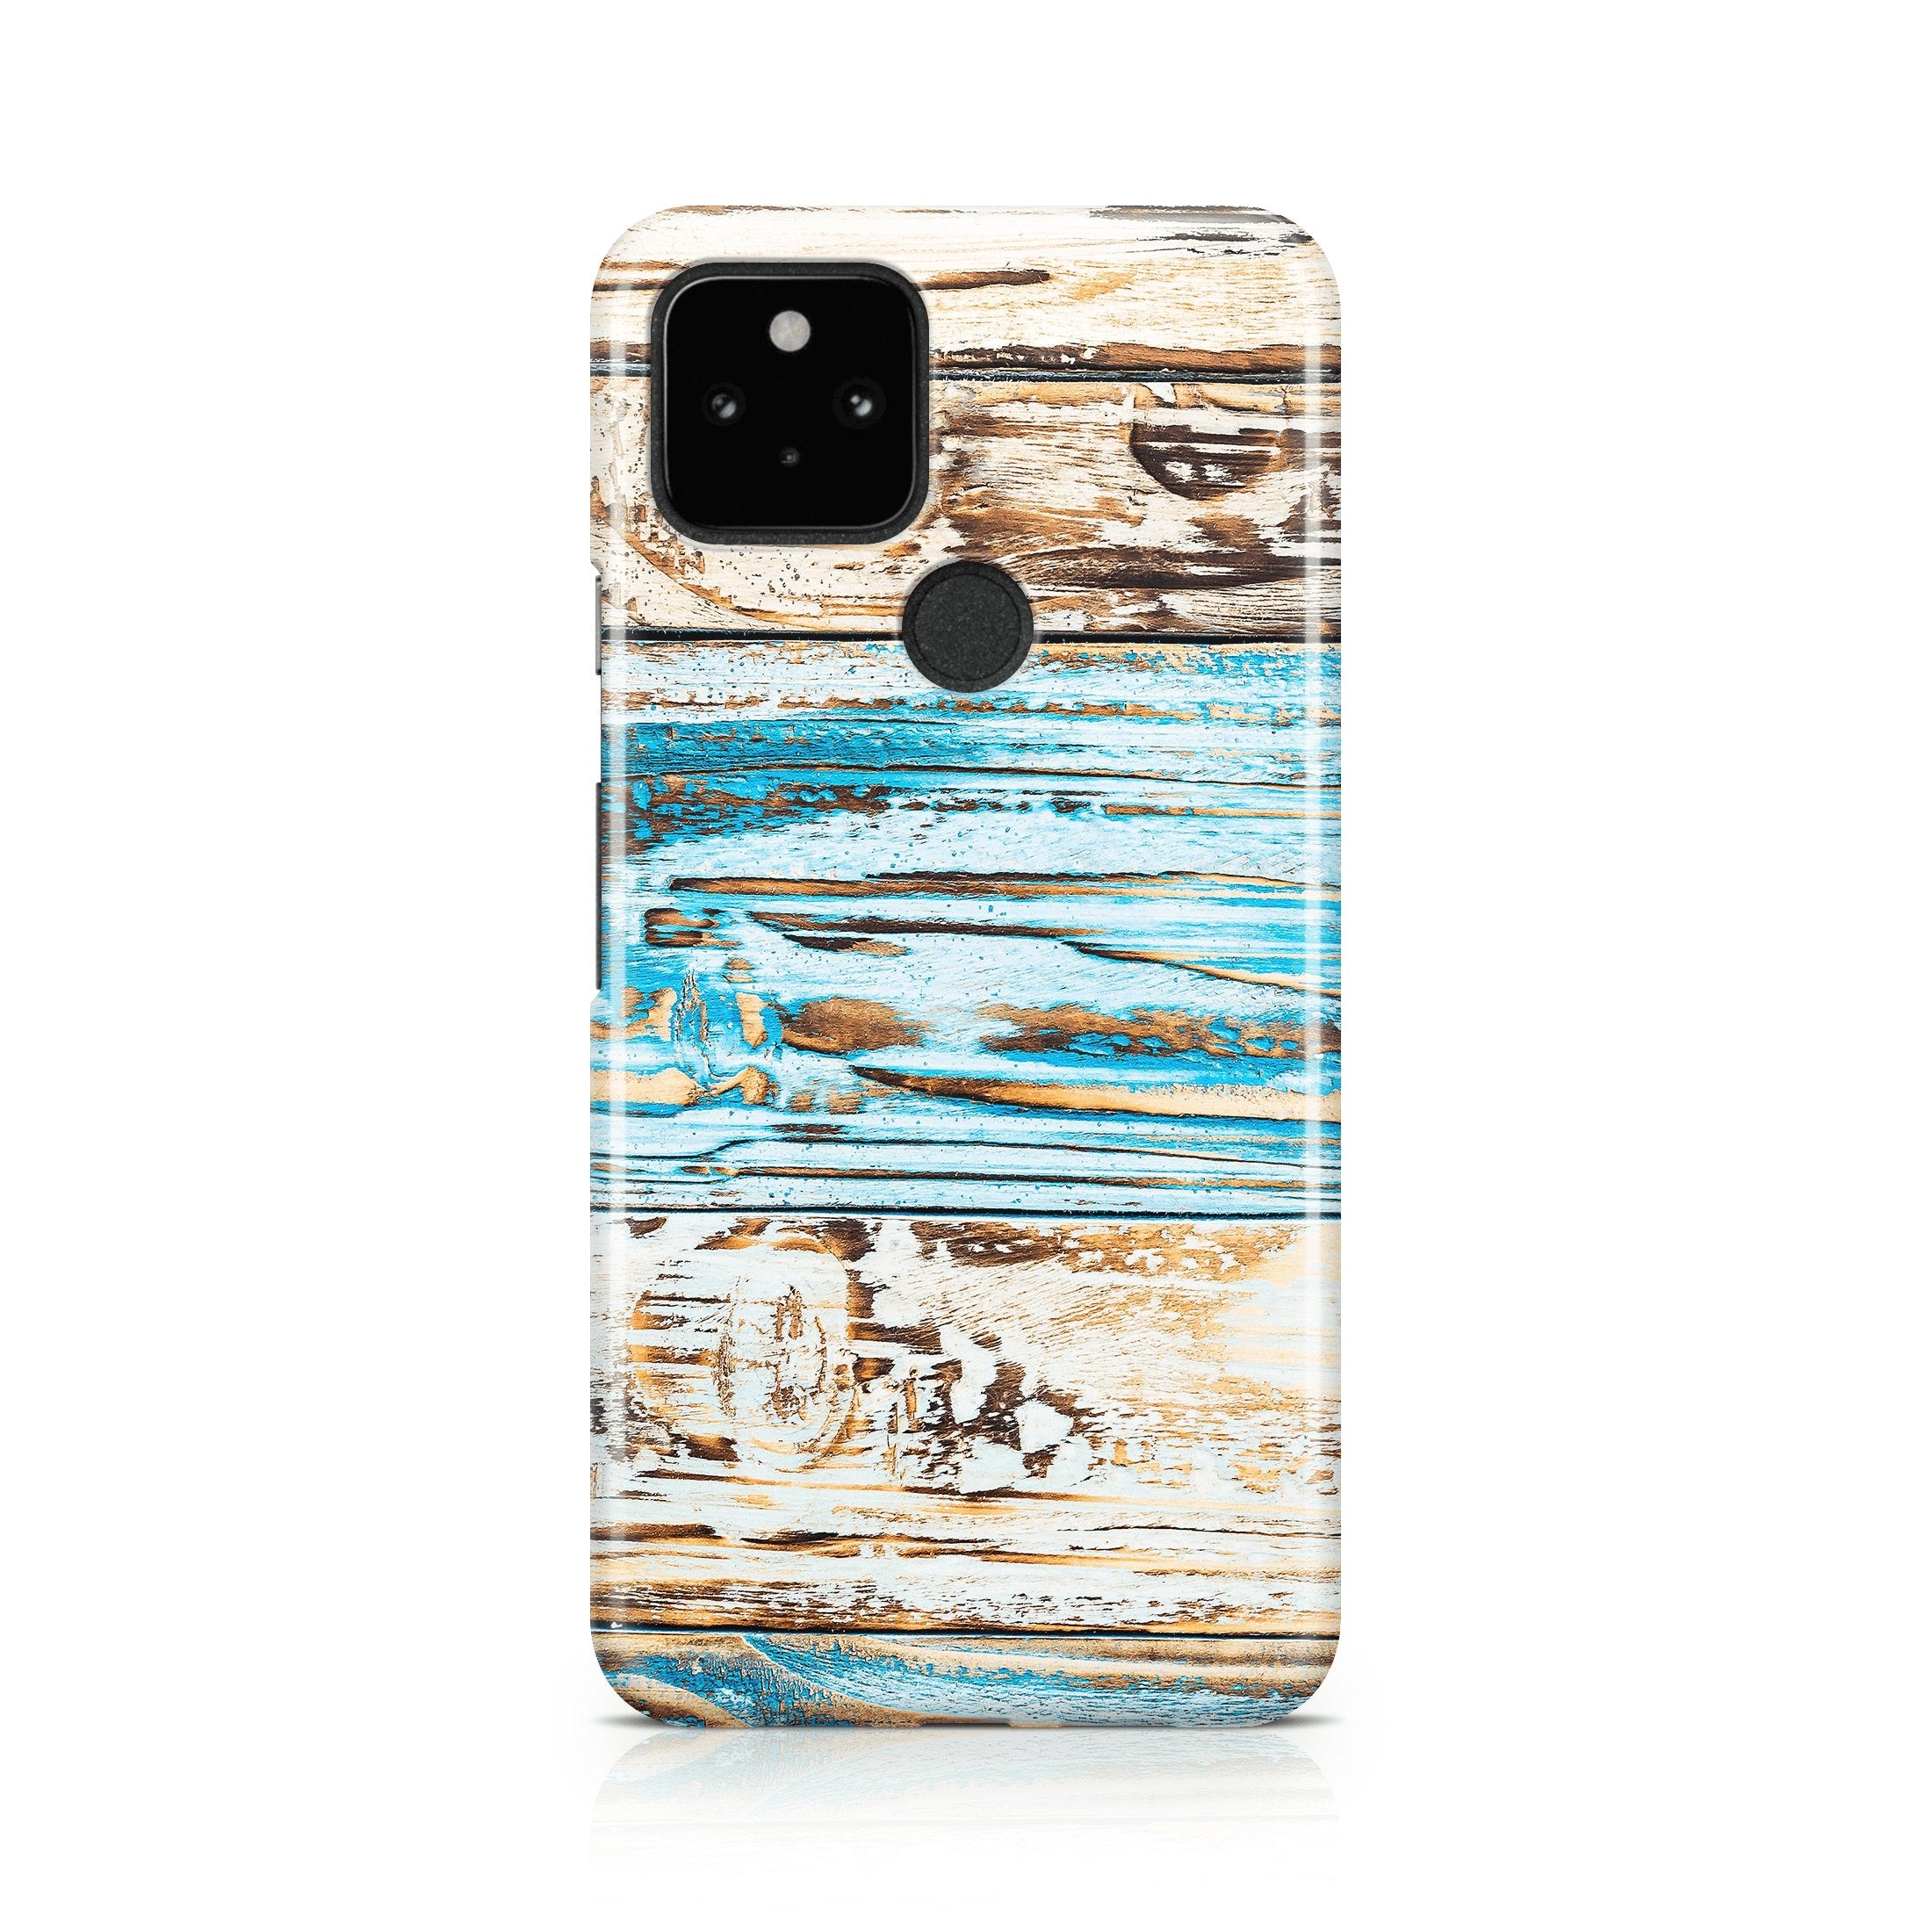 Scrapped Bluewash - Google phone case designs by CaseSwagger